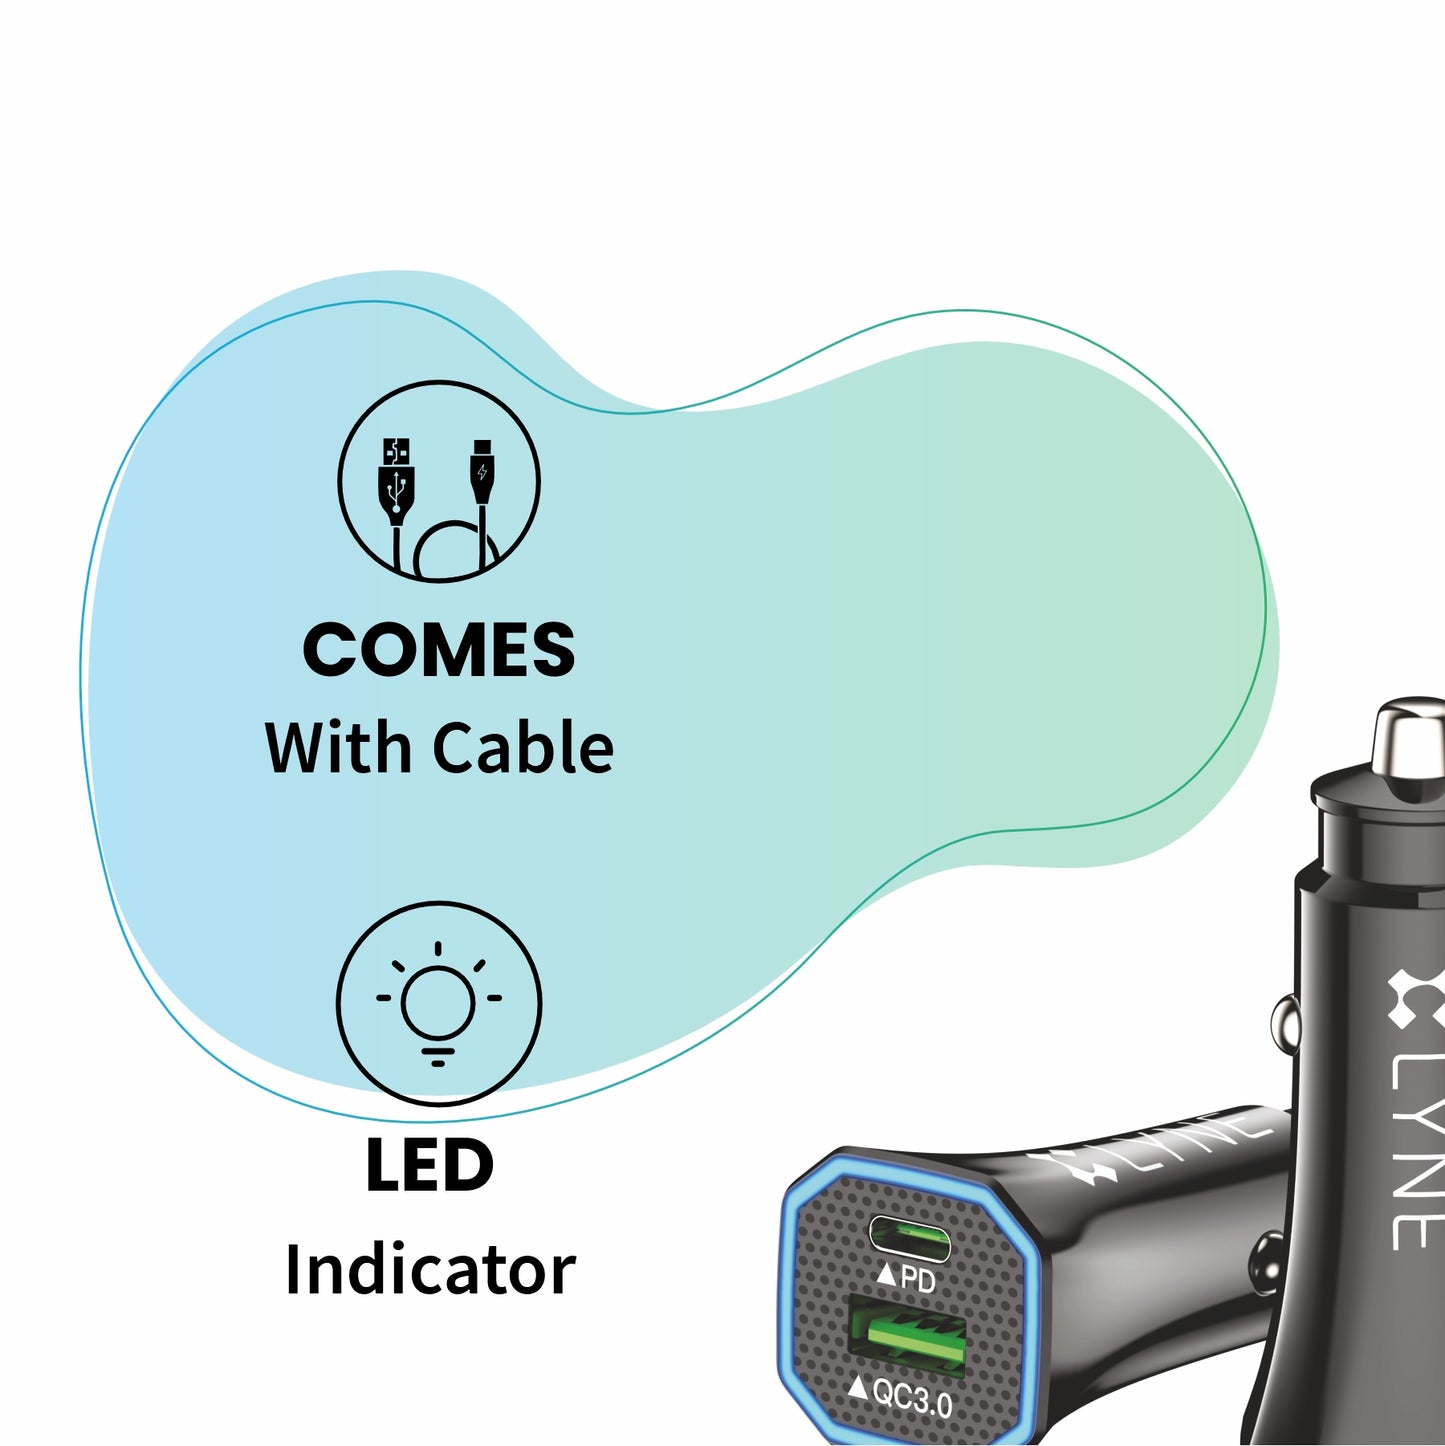 LYNE Piston 3 3A Output, With Cable, PD + QC Port, LED Indicator